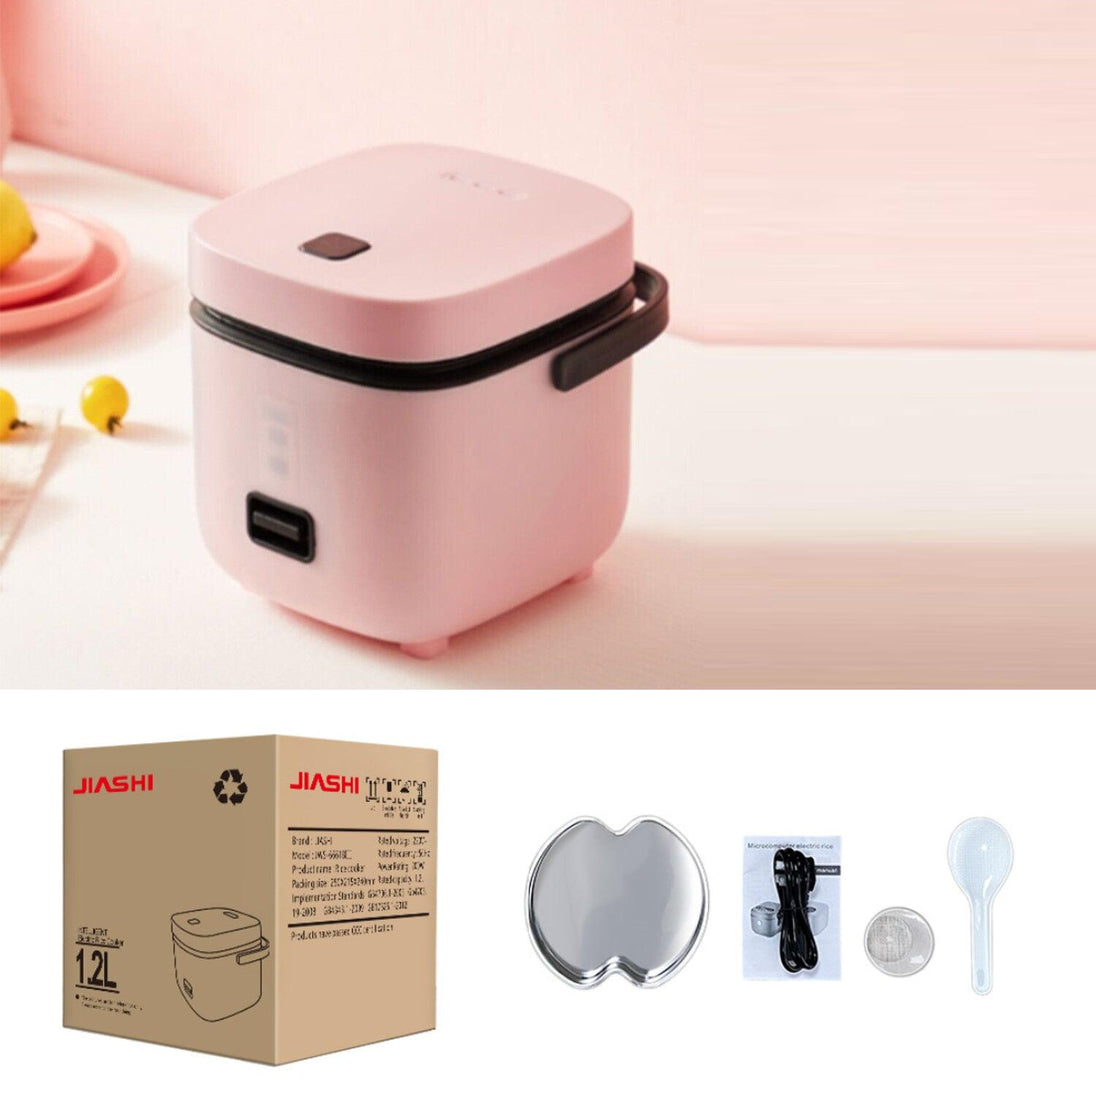 Buy 1.2L Mini Rice Cooker Travel Small Non-stick Pot For Cooking Soup Rice AU STOCK discounted | Products On Sale Australia